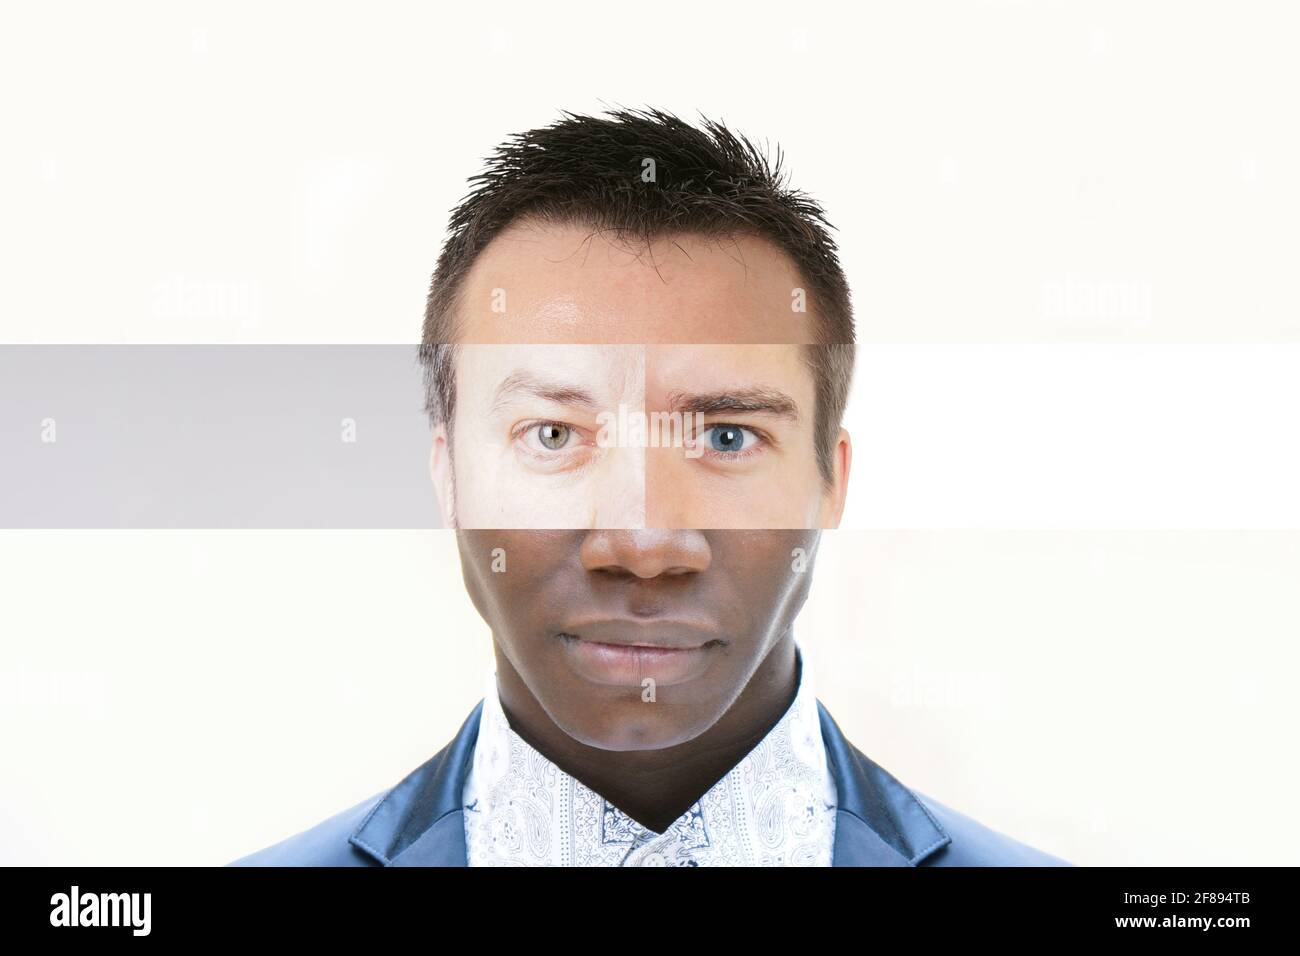 composite face made of male people with different skin colors - diversity collage Stock Photo